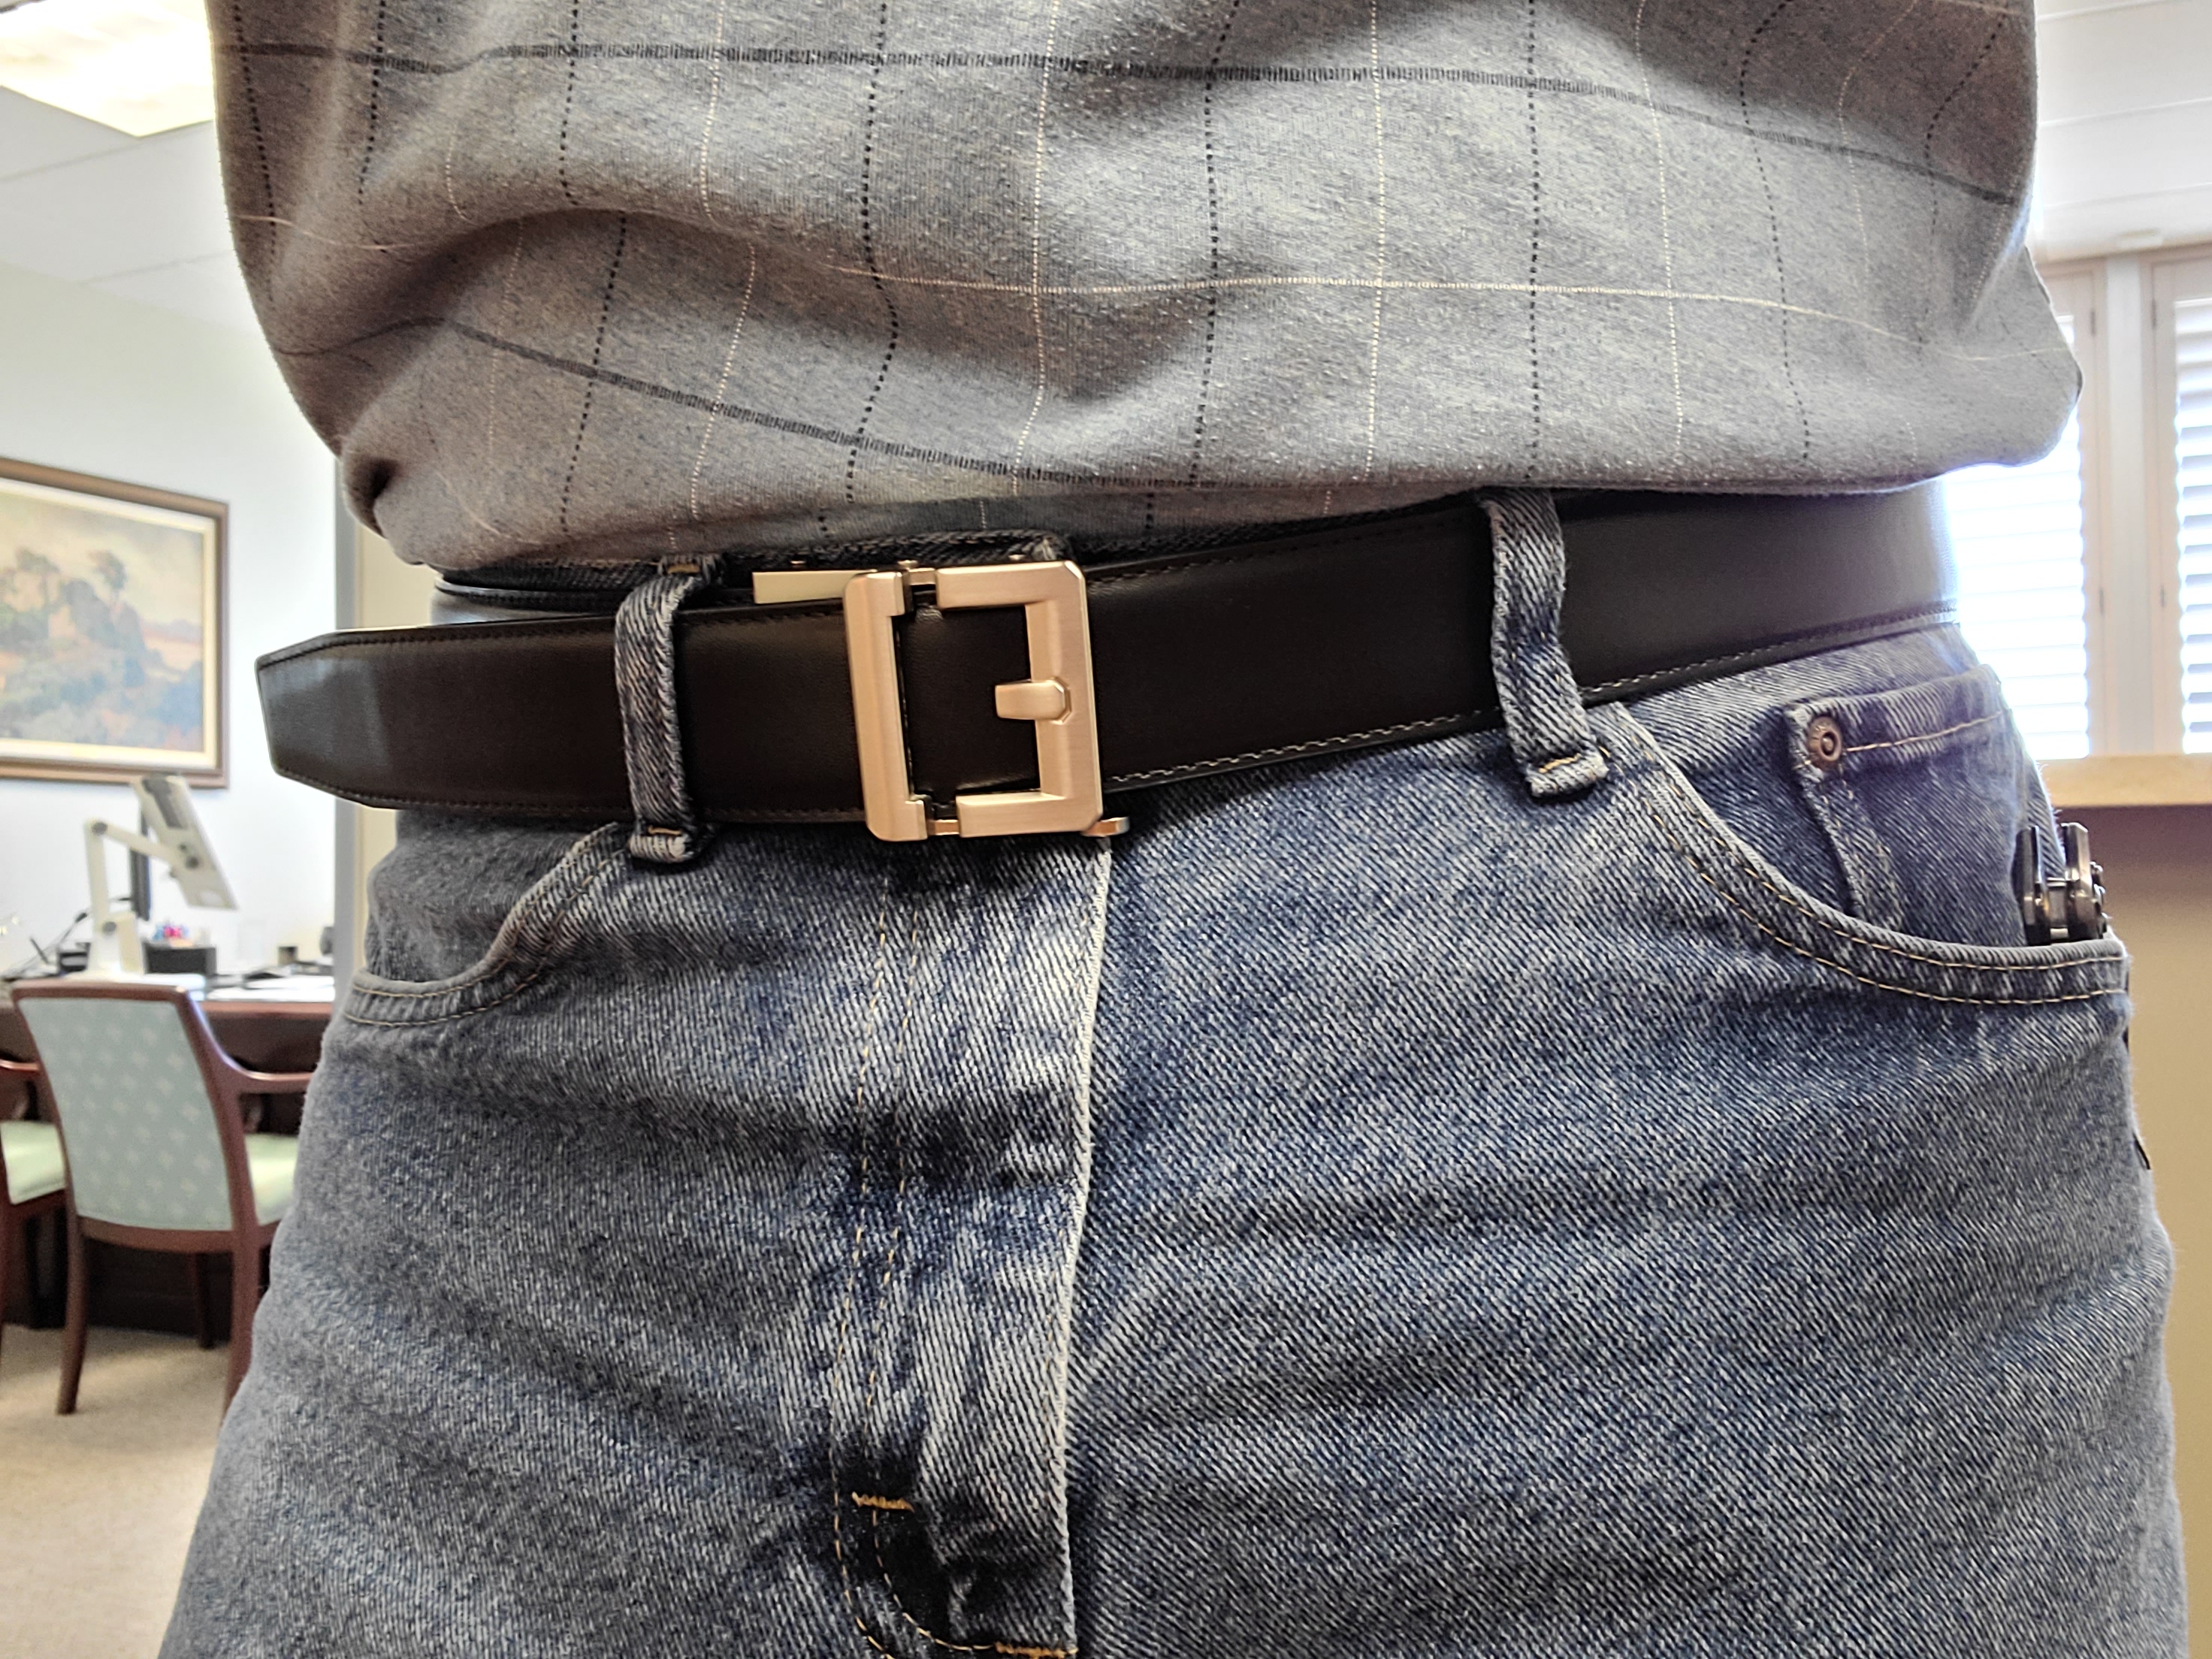 TOP 10 TIPS FOR CONCEALED CARRY – Kore Essentials